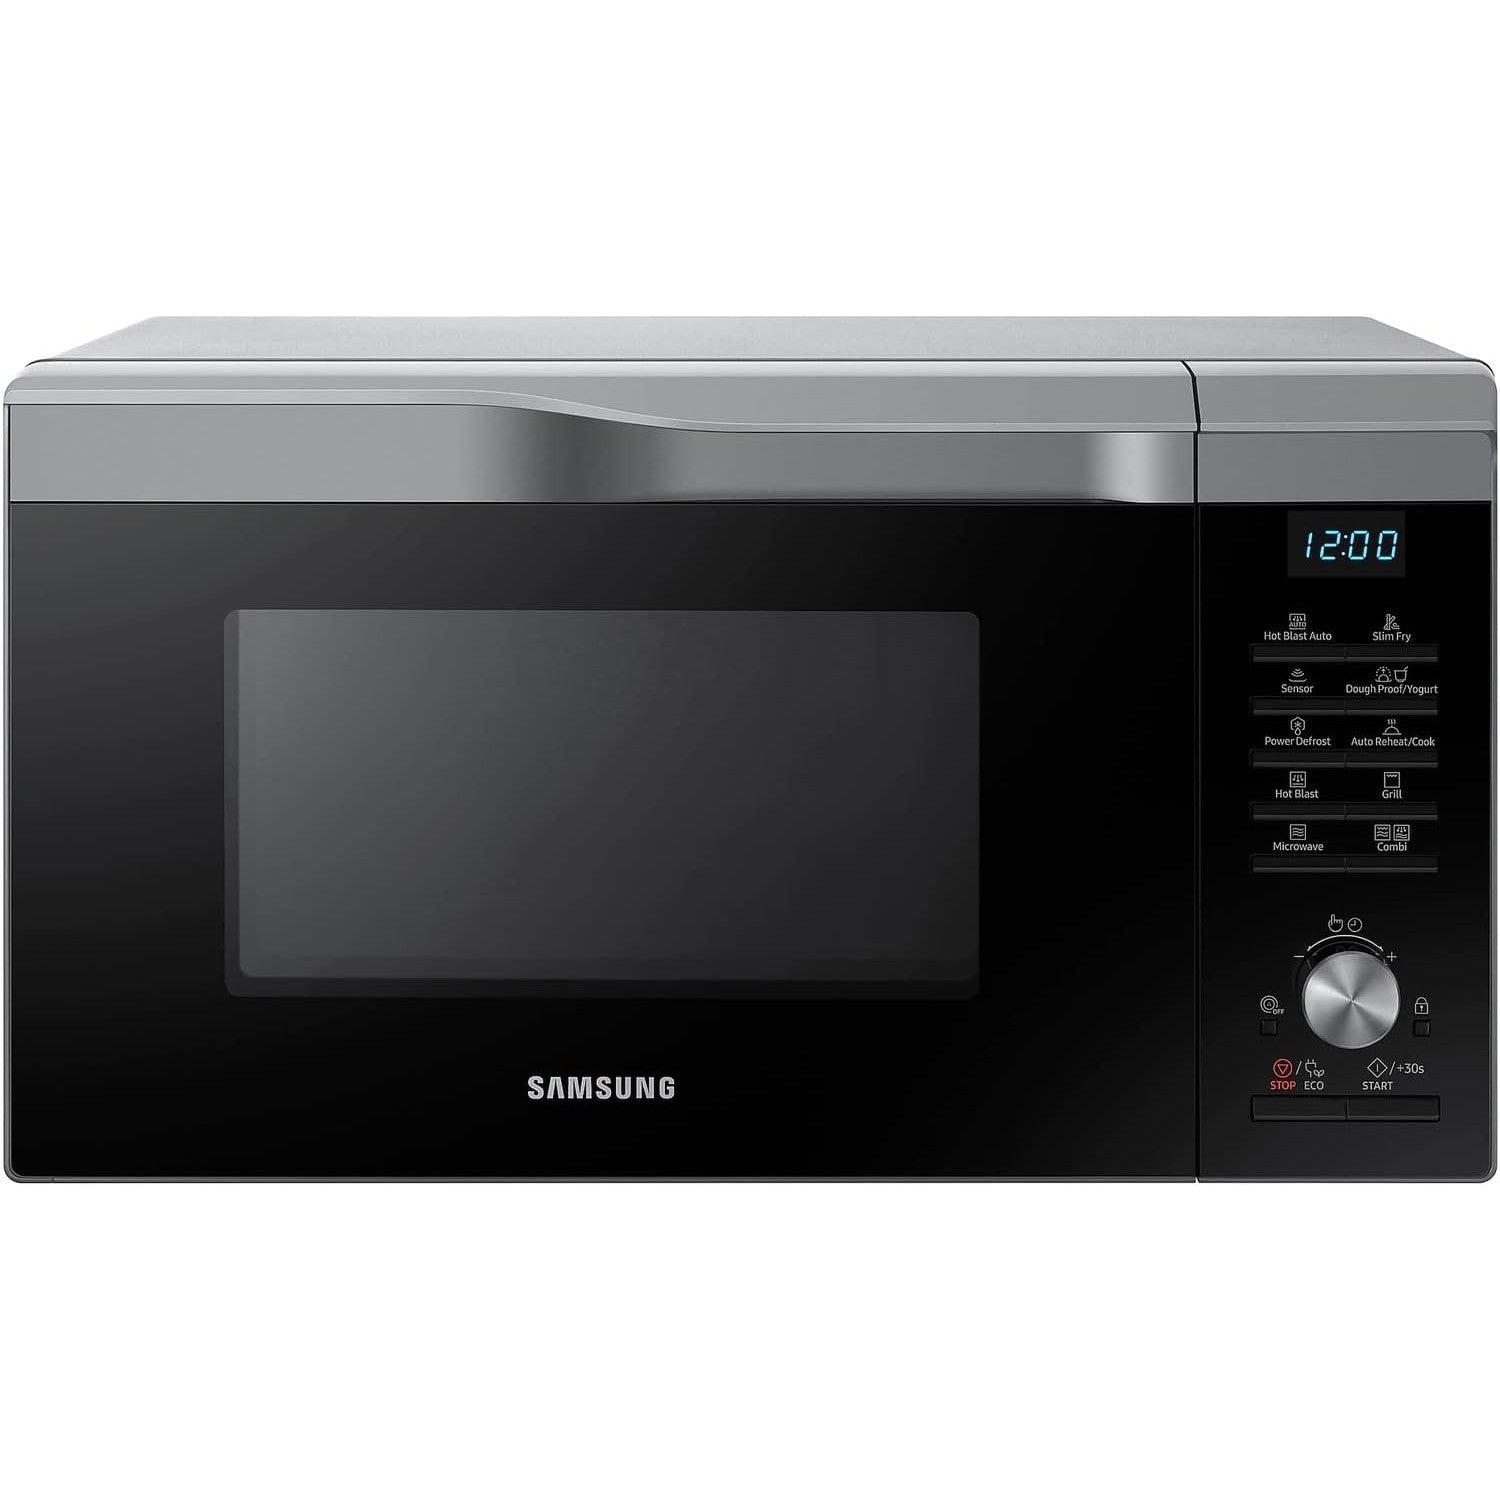 Samsung Easy View MC28M6075CS Combination Microwave Oven - New